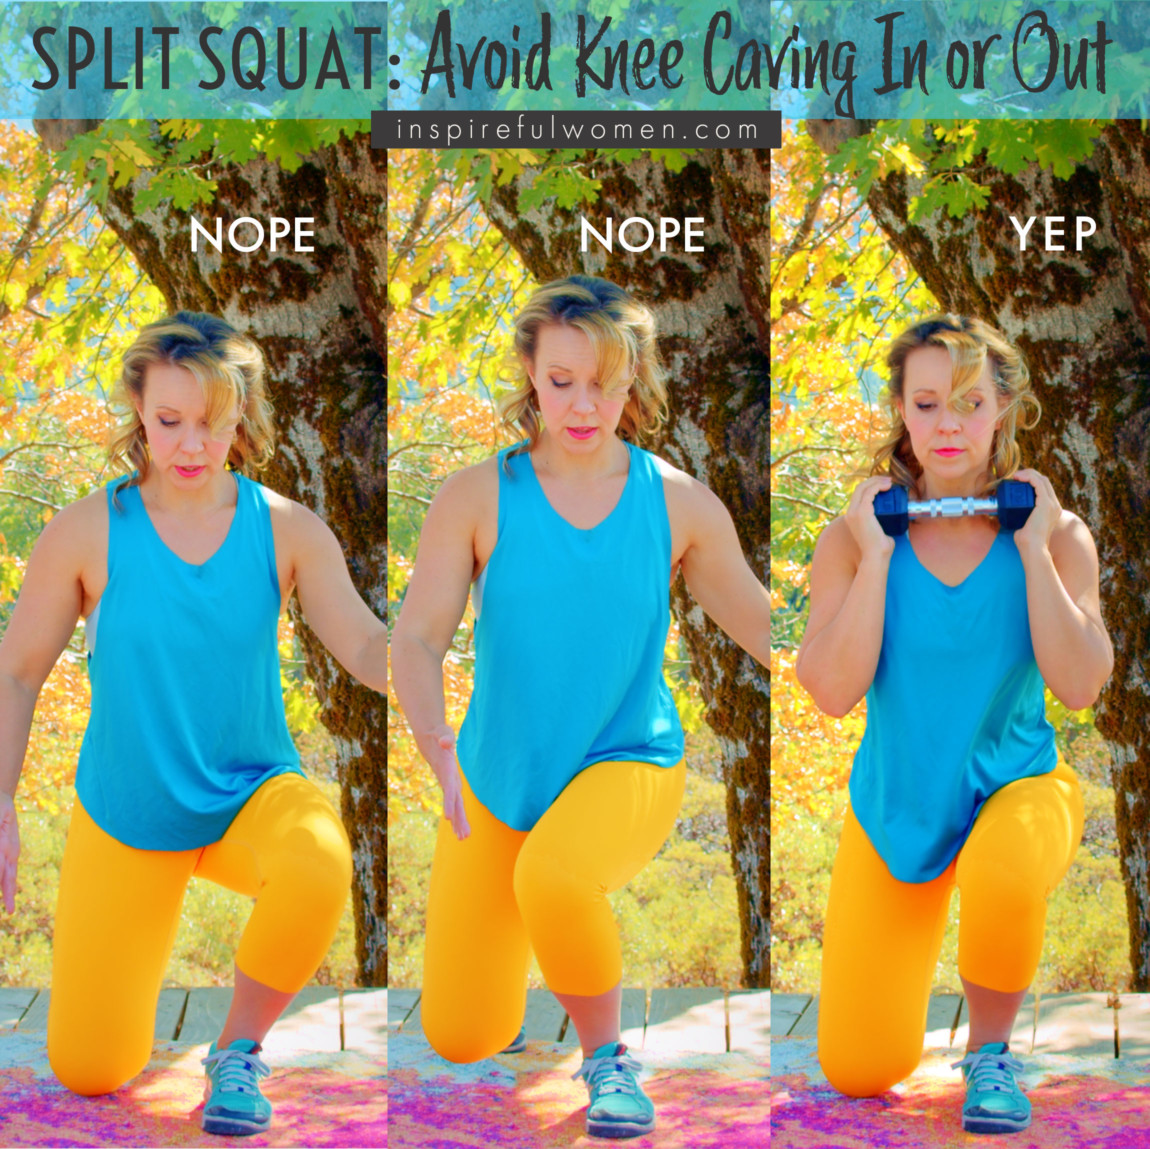 avoid-knee-caving-in-out-split-squat-form